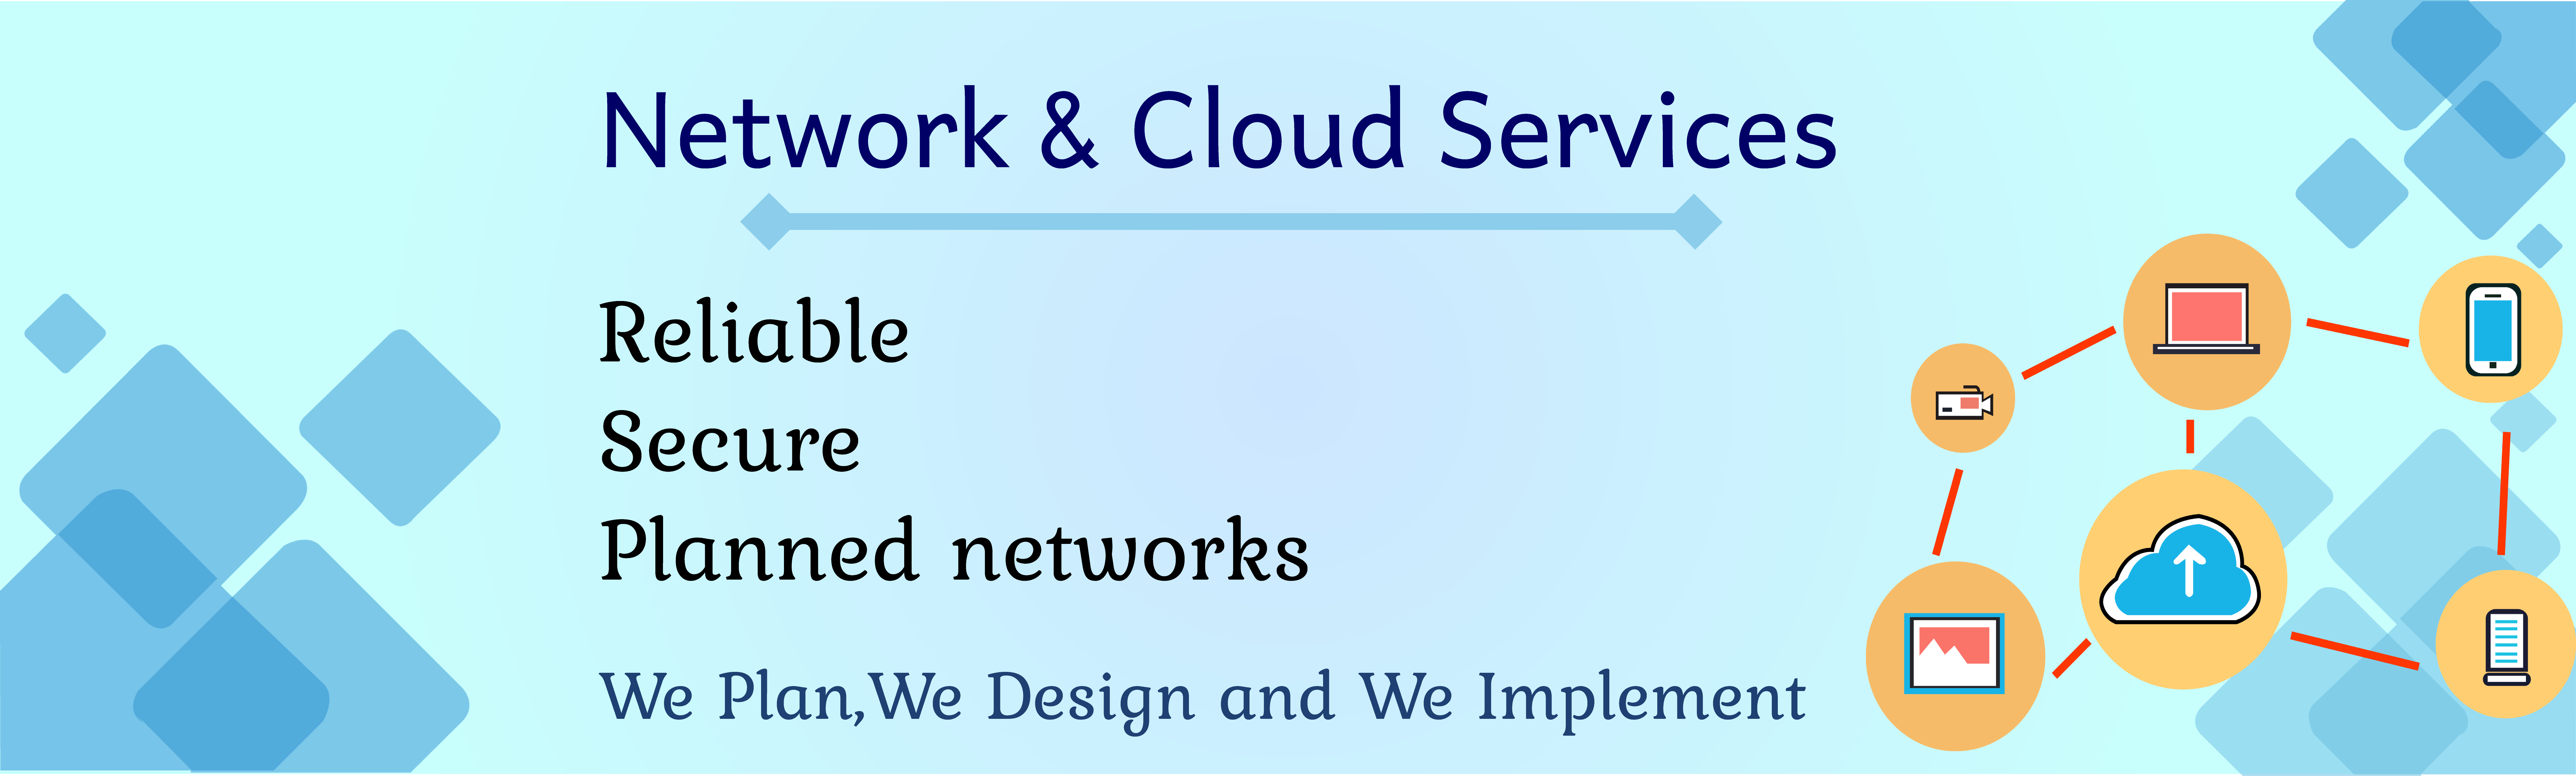 network and cloud